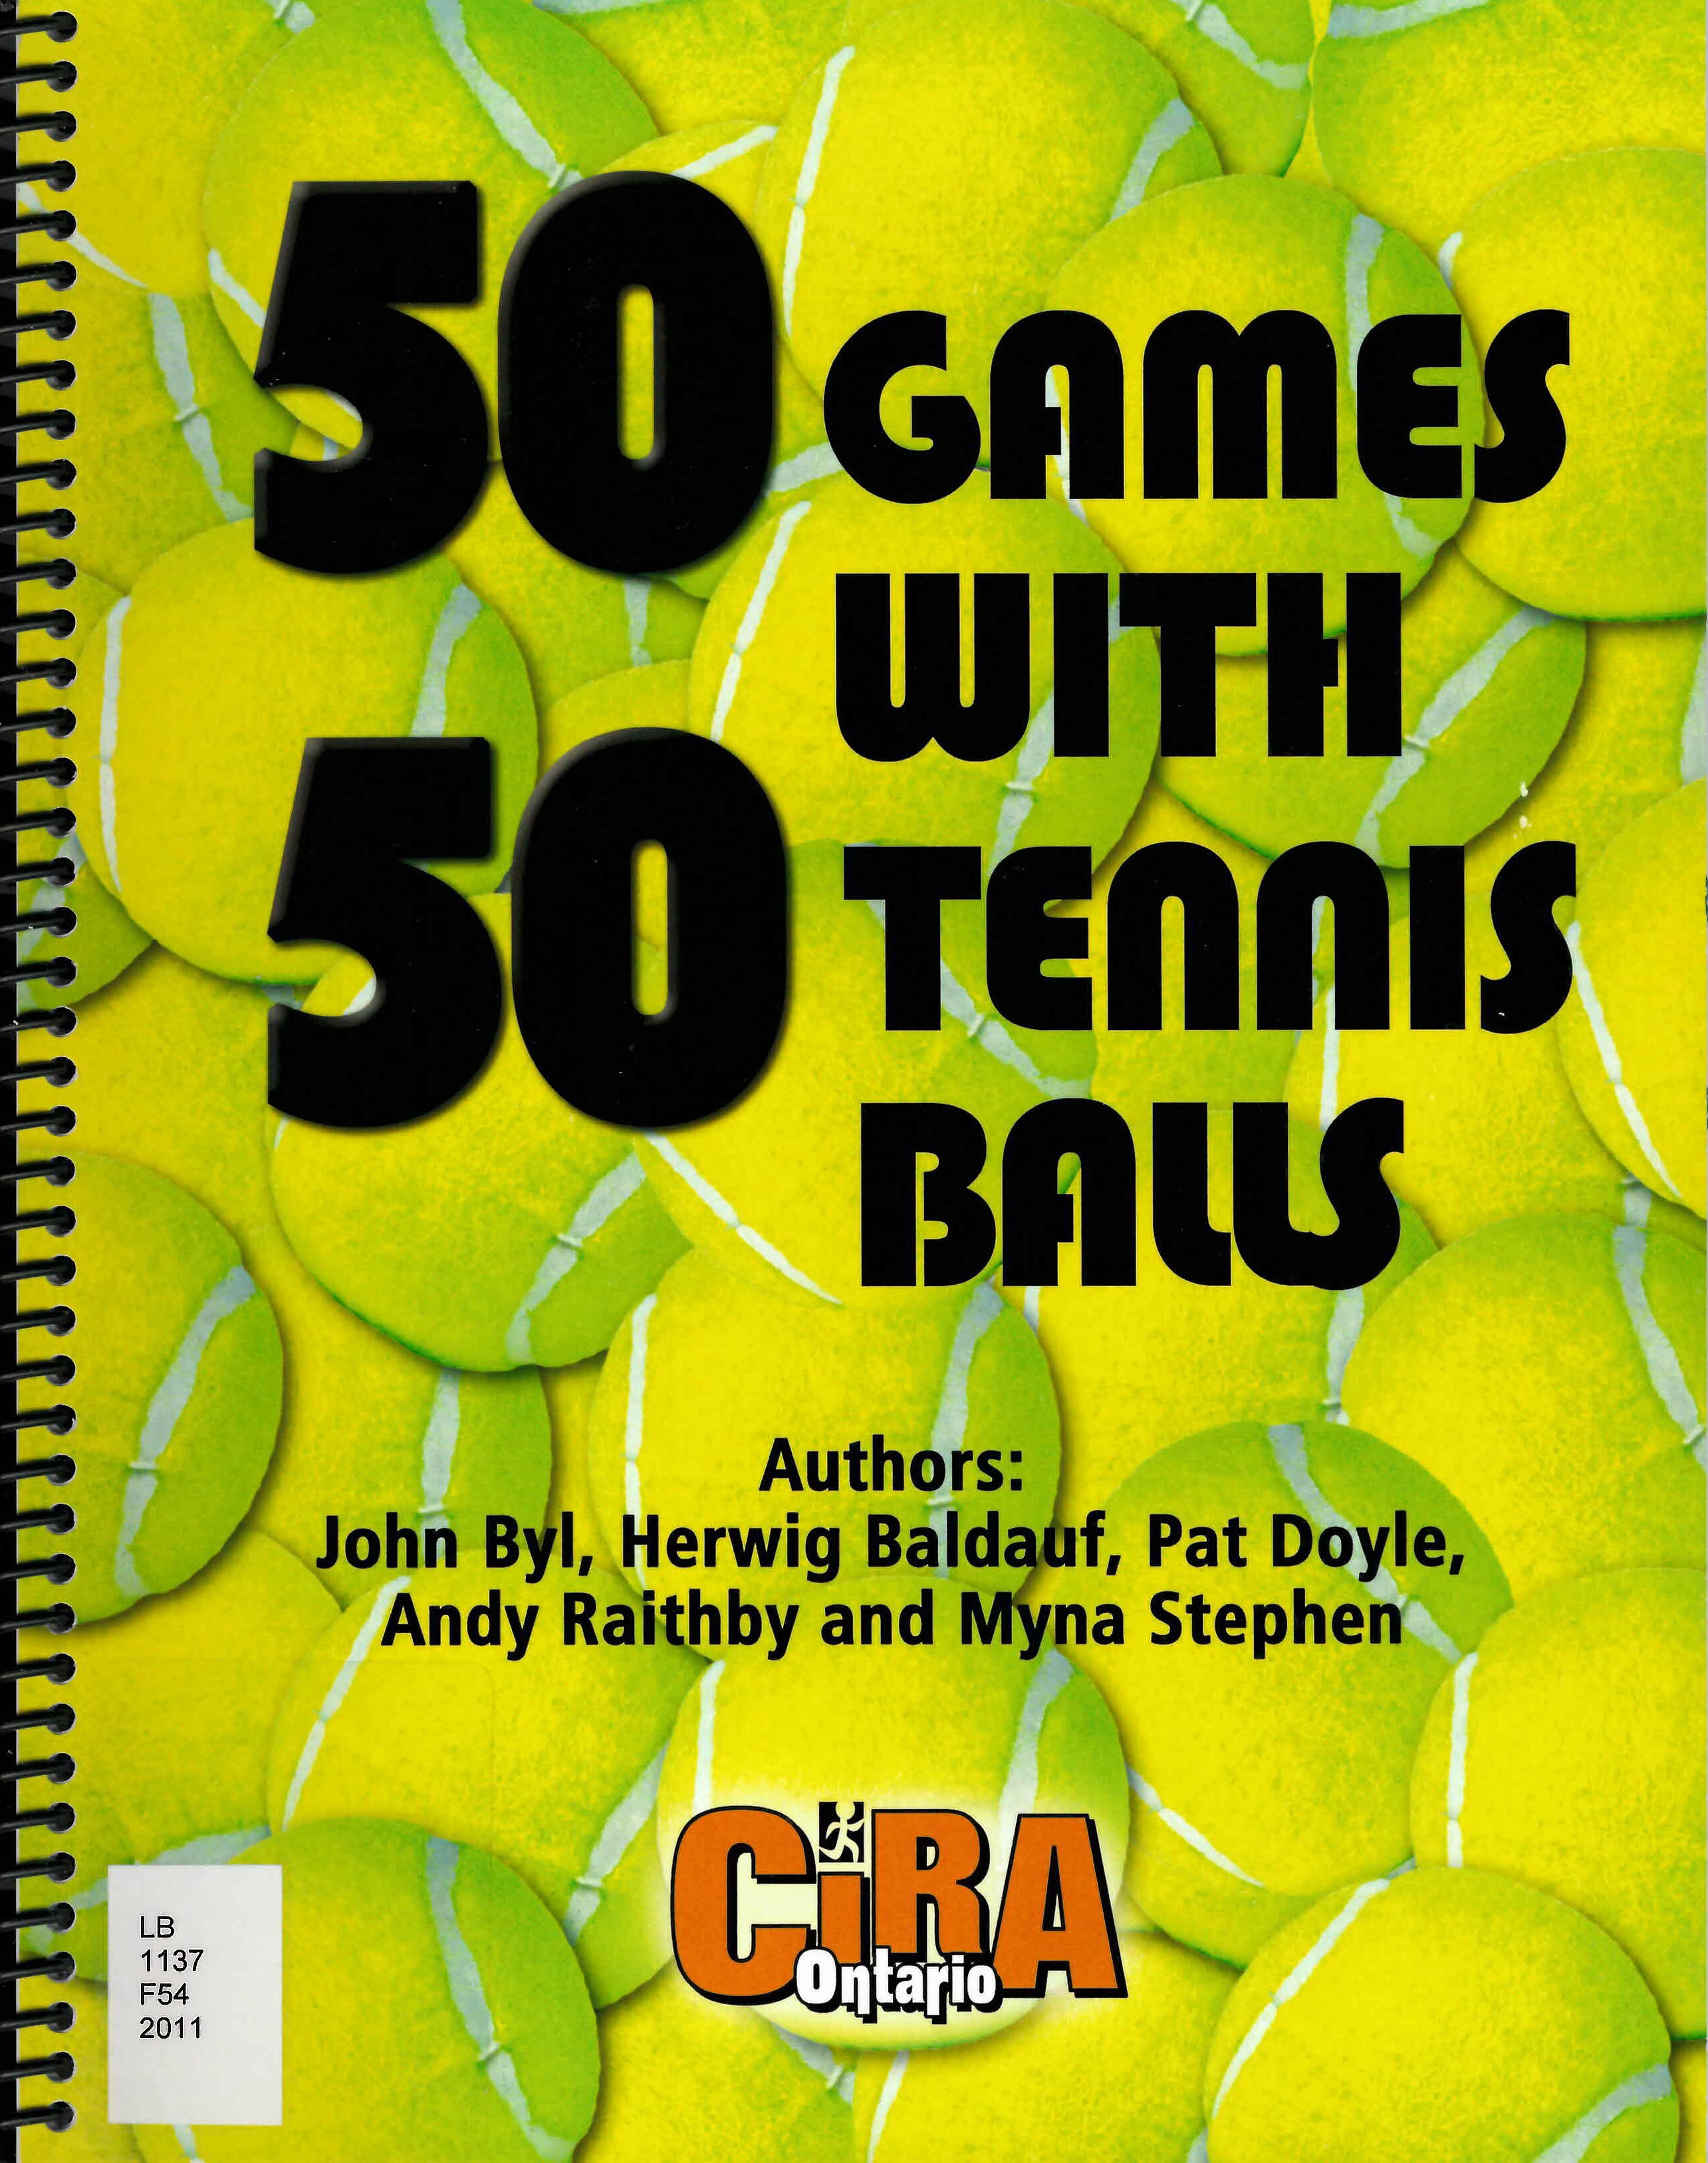 50 games with 50 tennis balls